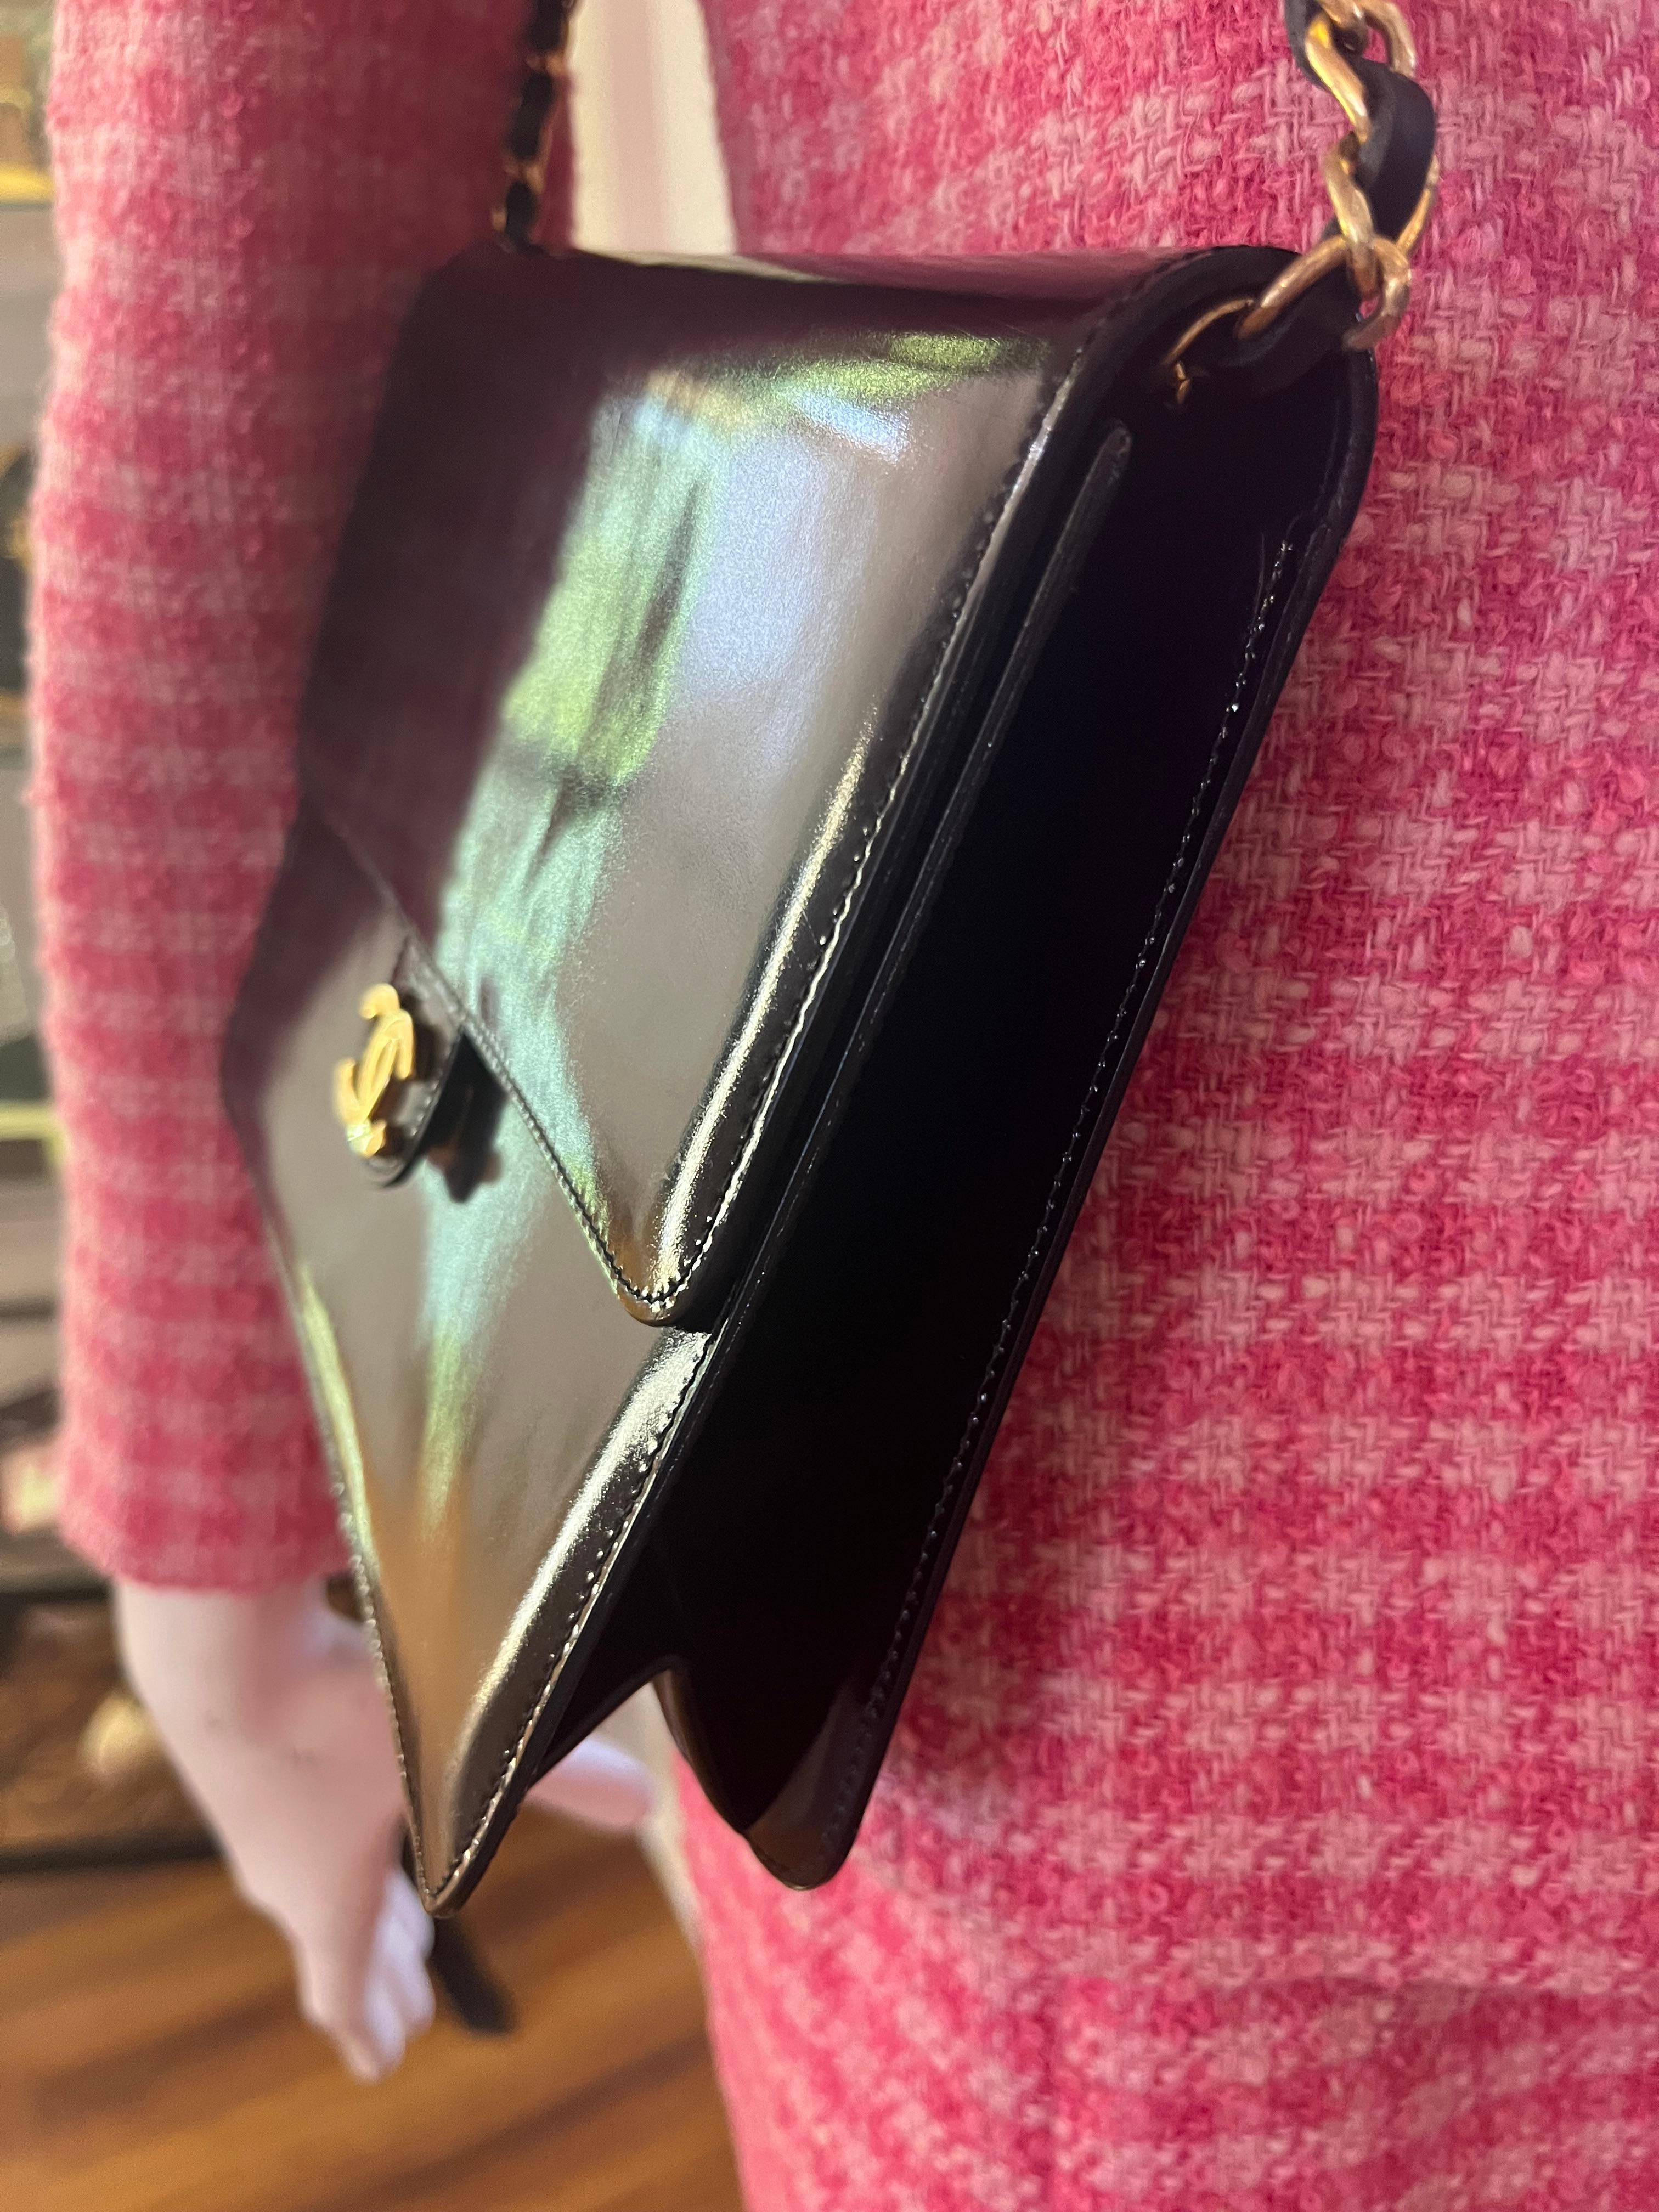 Women's 1986-88 Chanel Black Patent Leather Handbag w/COA and Card For Sale